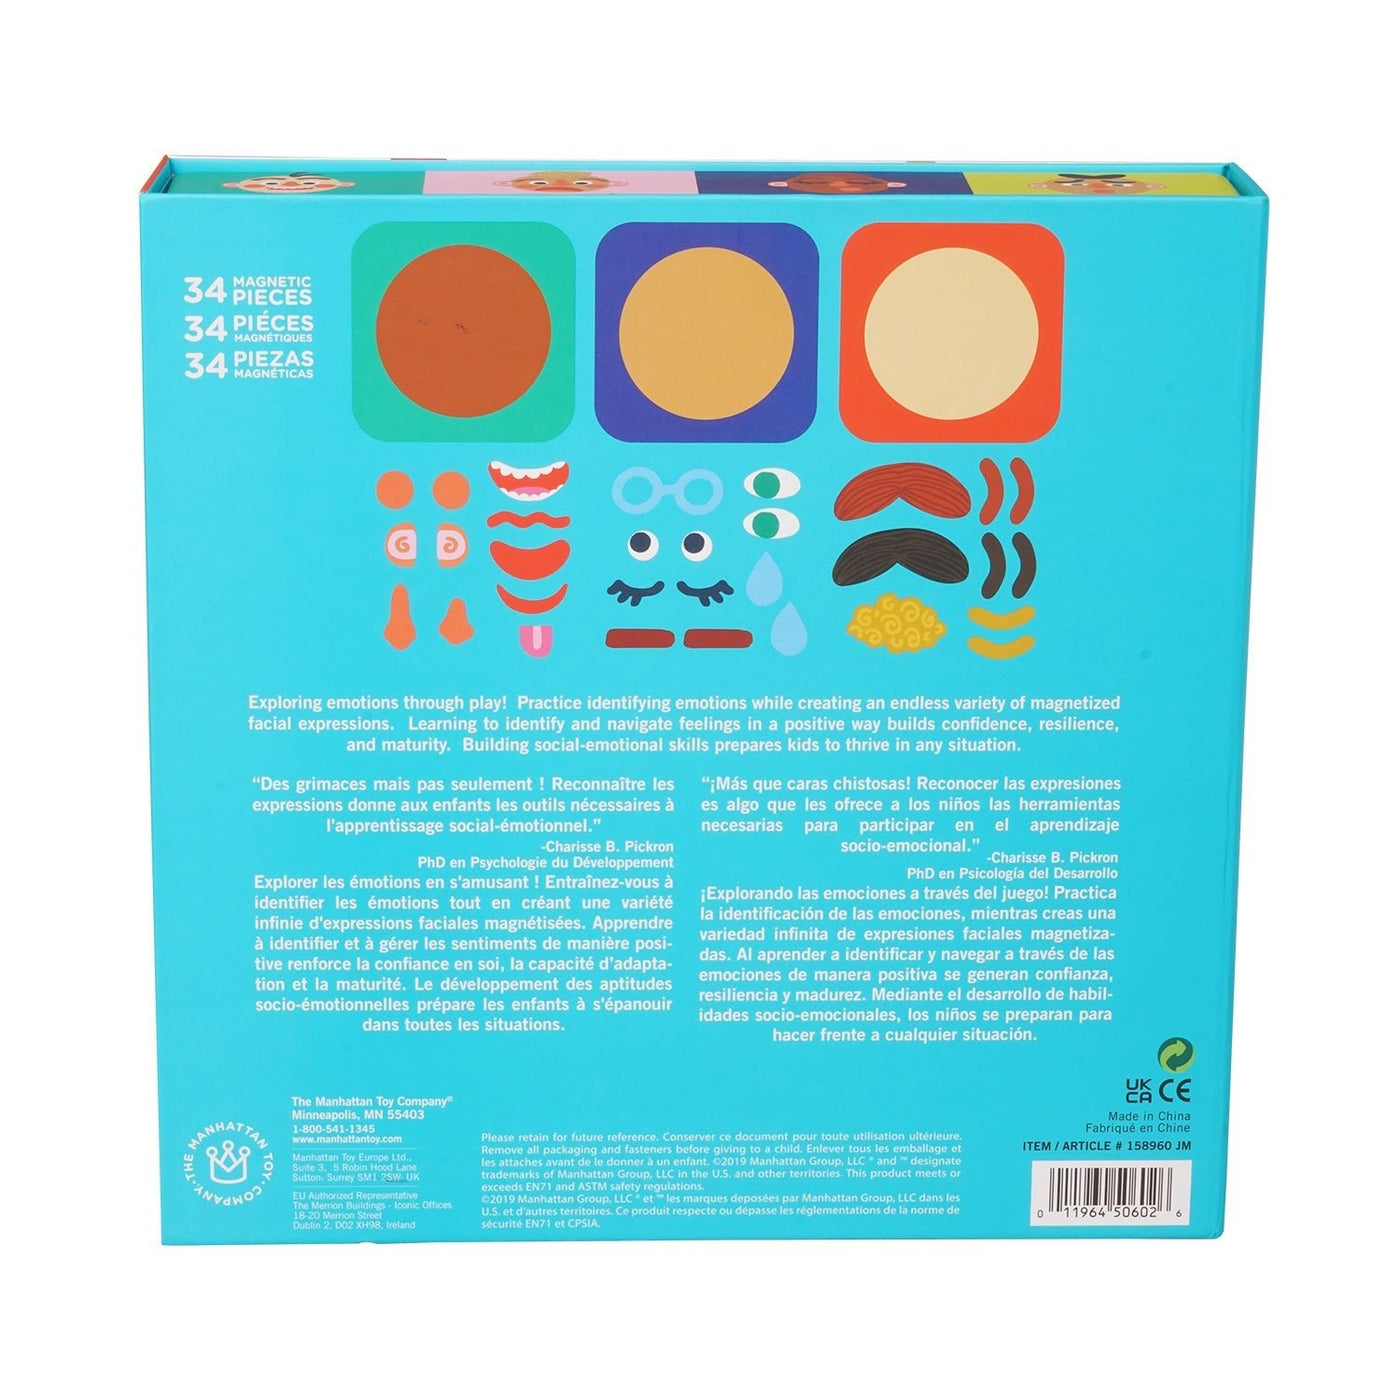 Making Faces Magnetic Set by Manhattan Toy